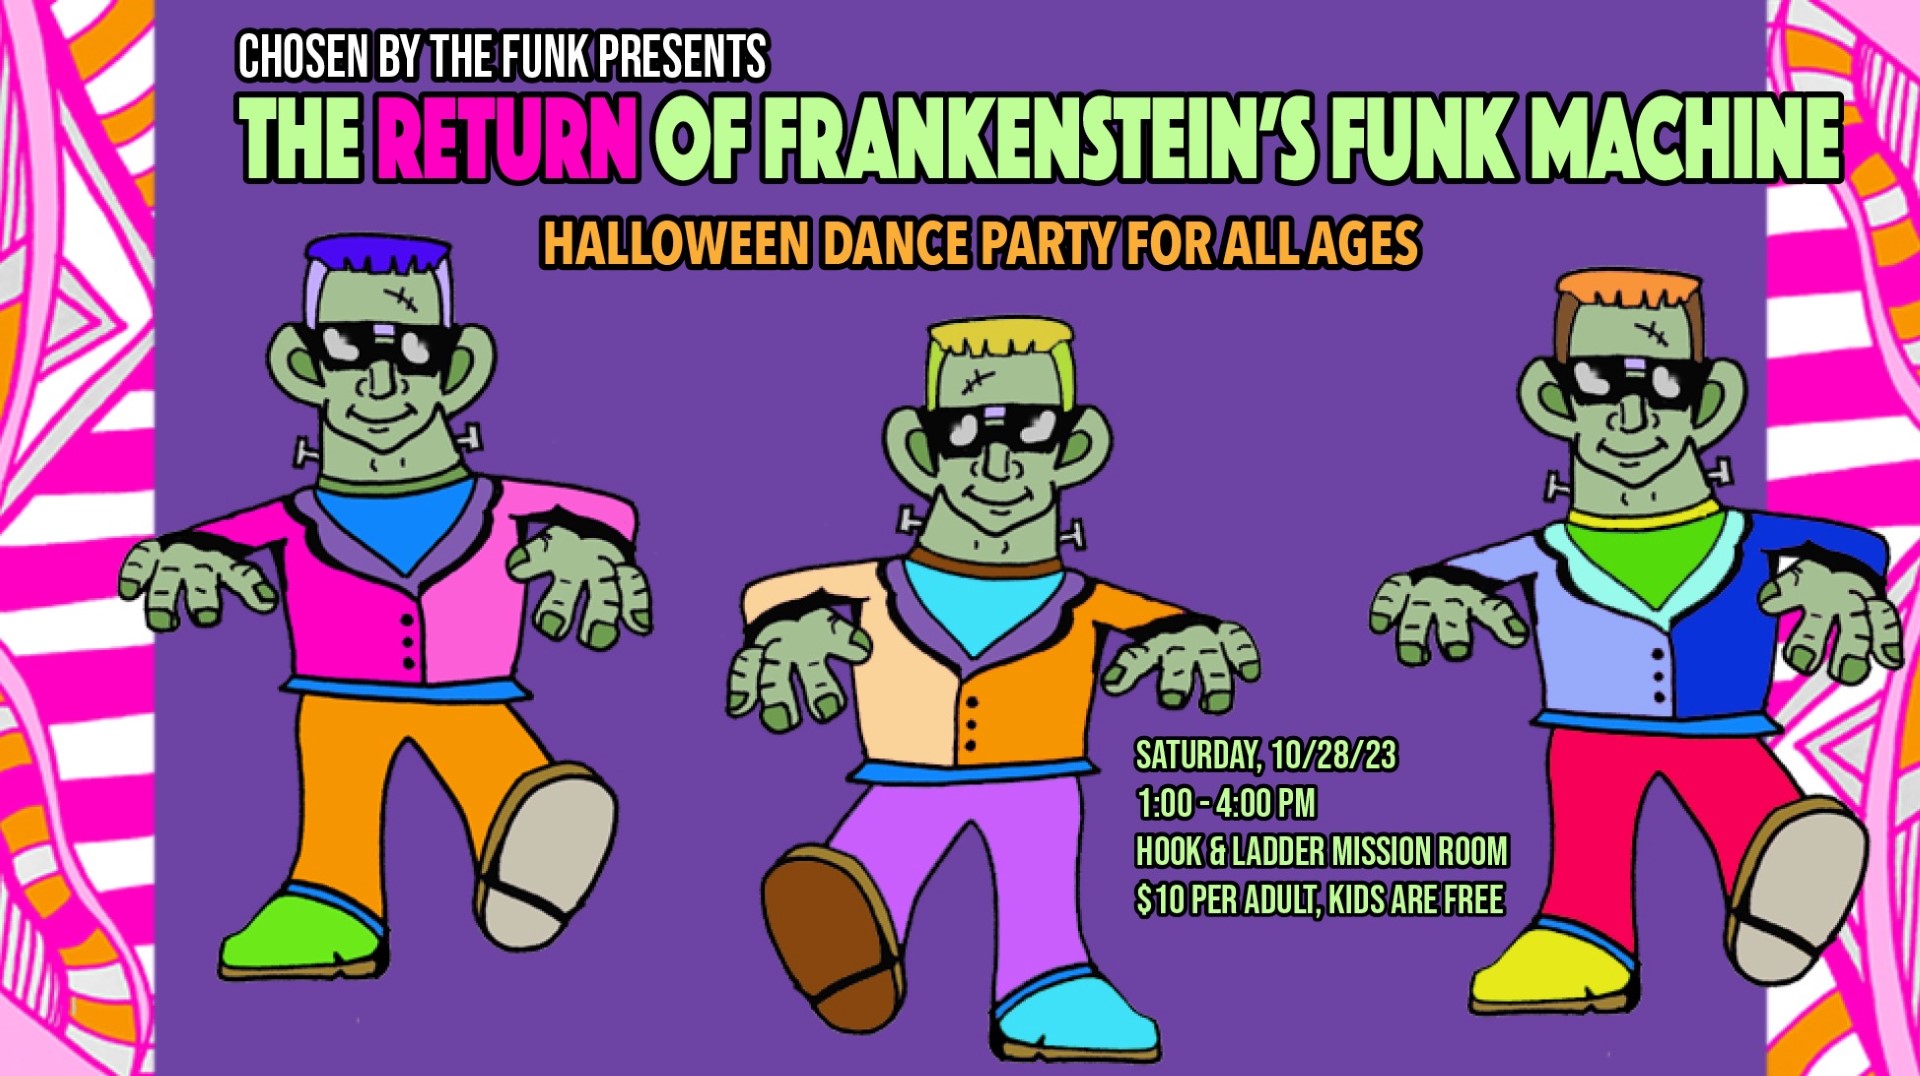 Chosen By The Funk Presents The Return of Frankenstein’s Funk Machine The Hook and Ladder Theater Mission Room October 28, 2023 1-4 PM $10 suggested donation for Adults, Kids are free!